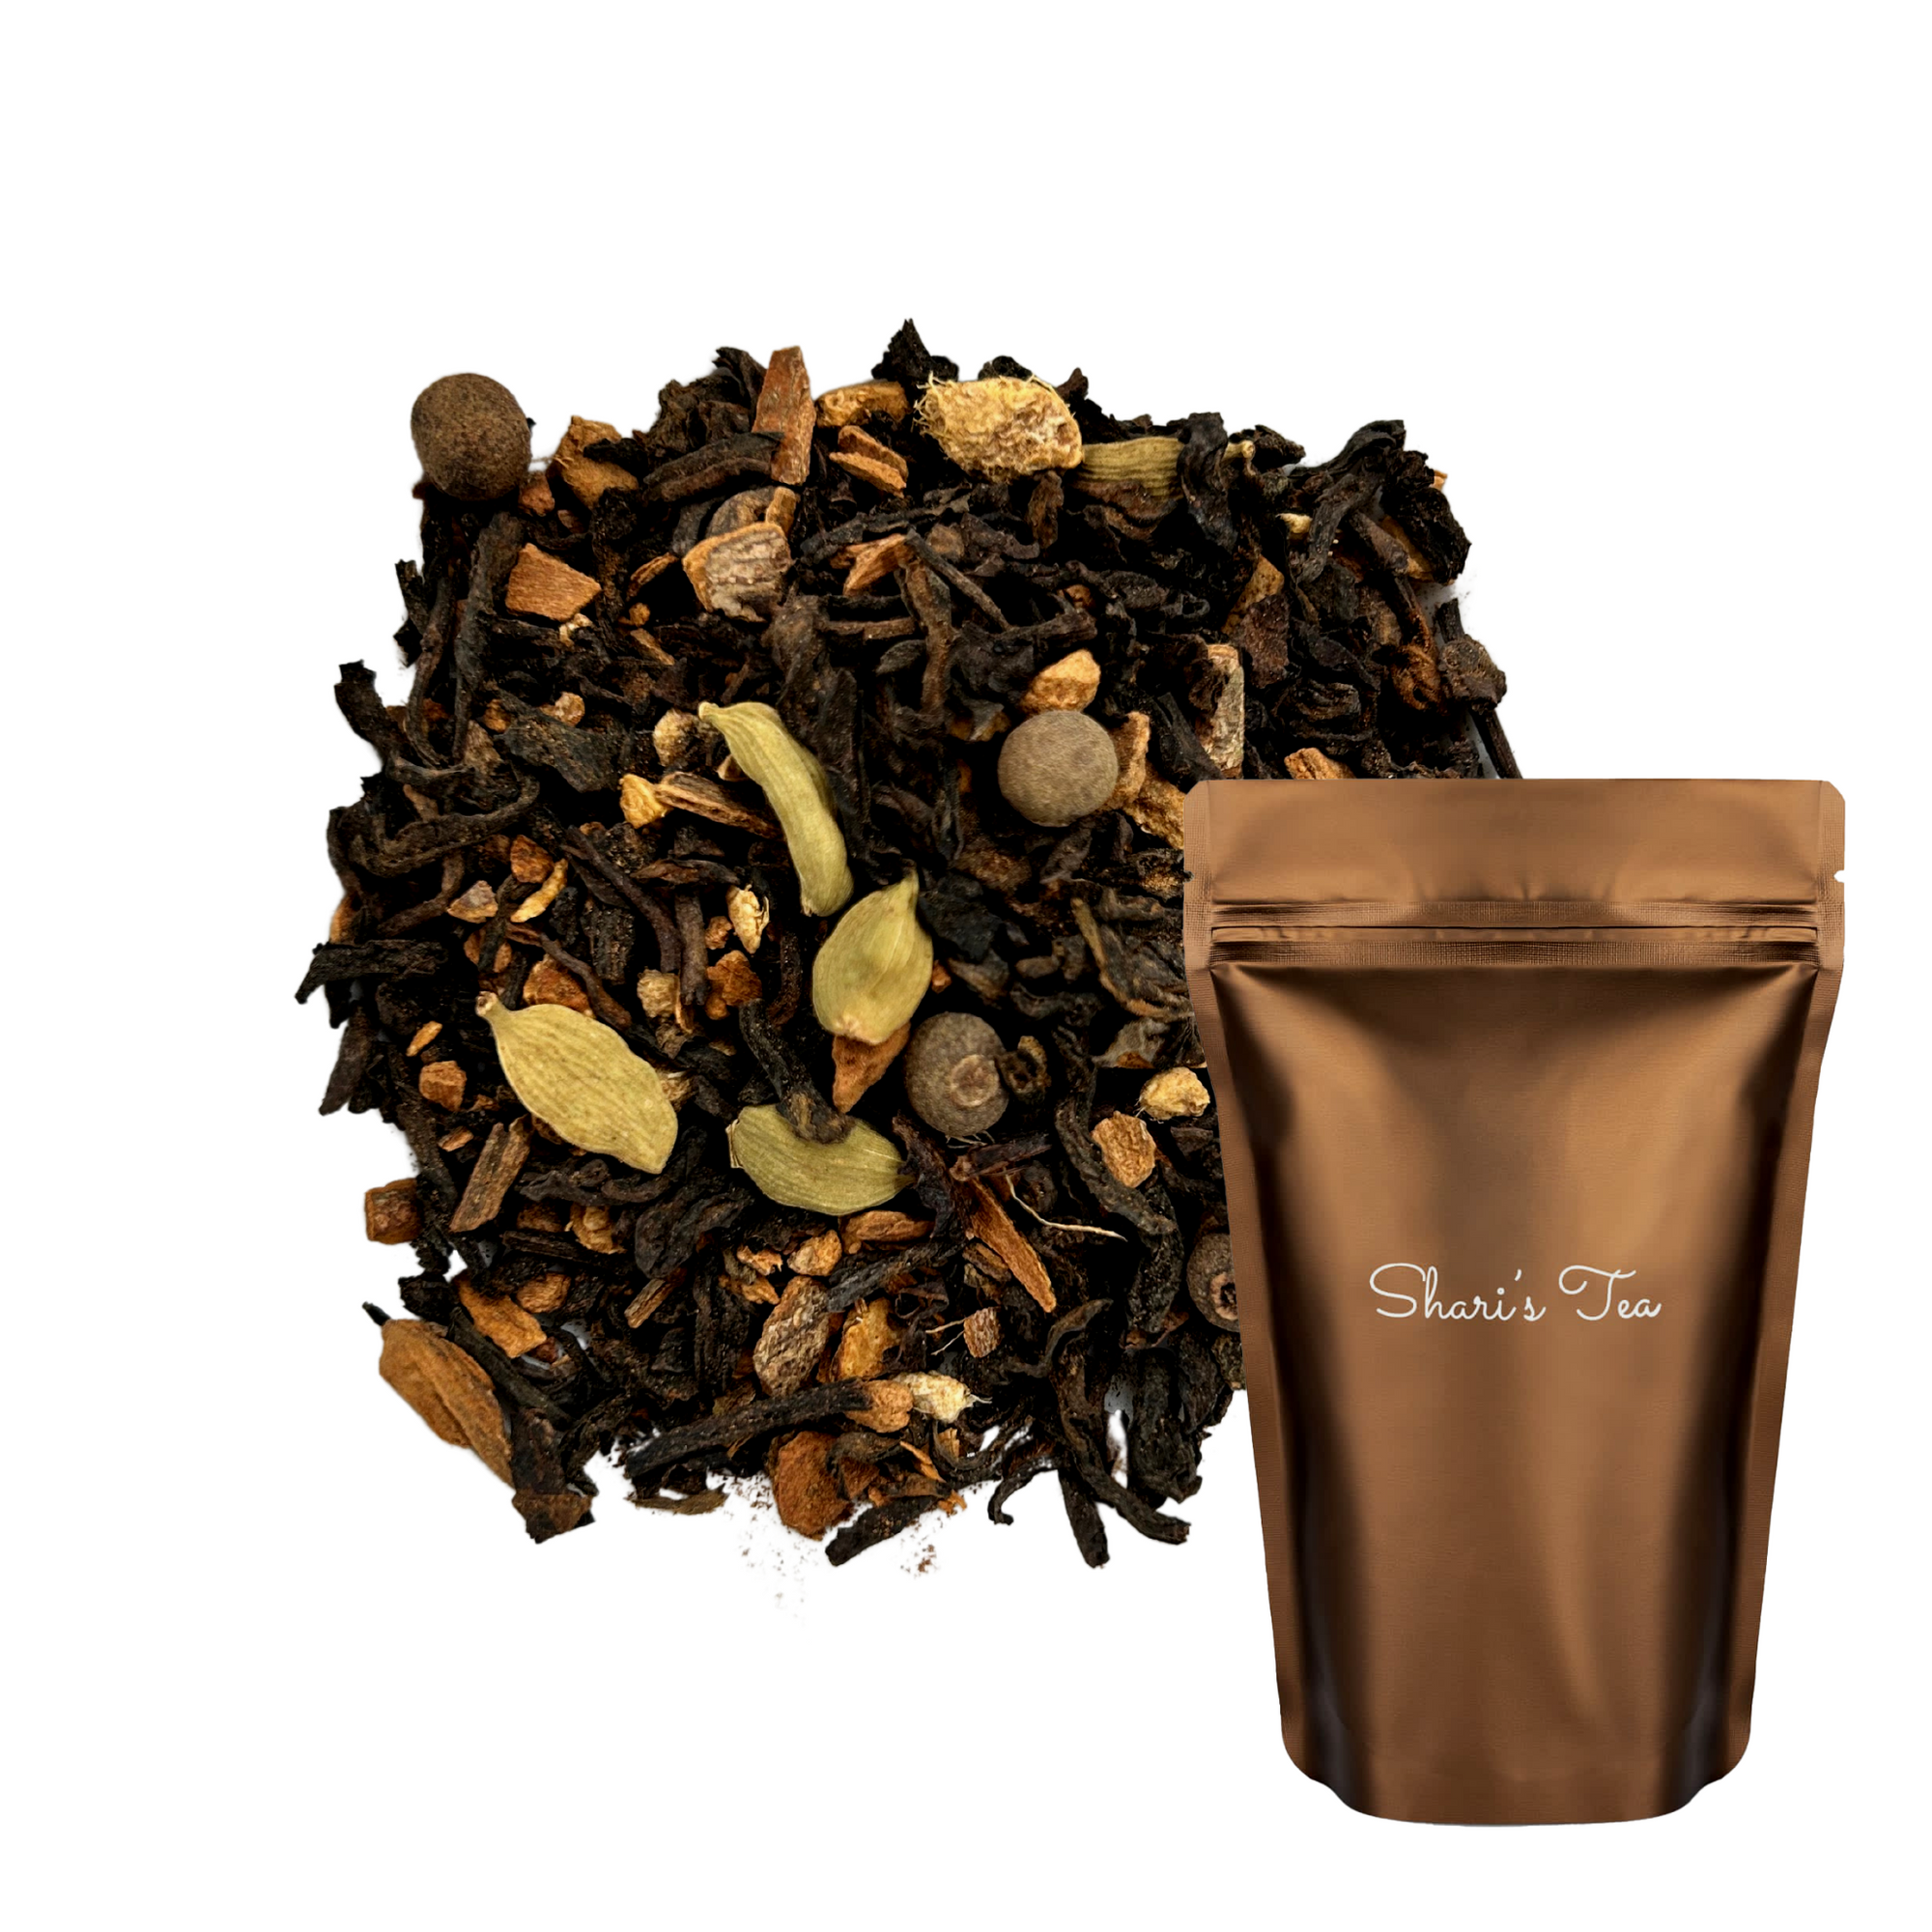 The Benefits of Chai Pu-erh Black Tea with stand pouch of Shari's Tea